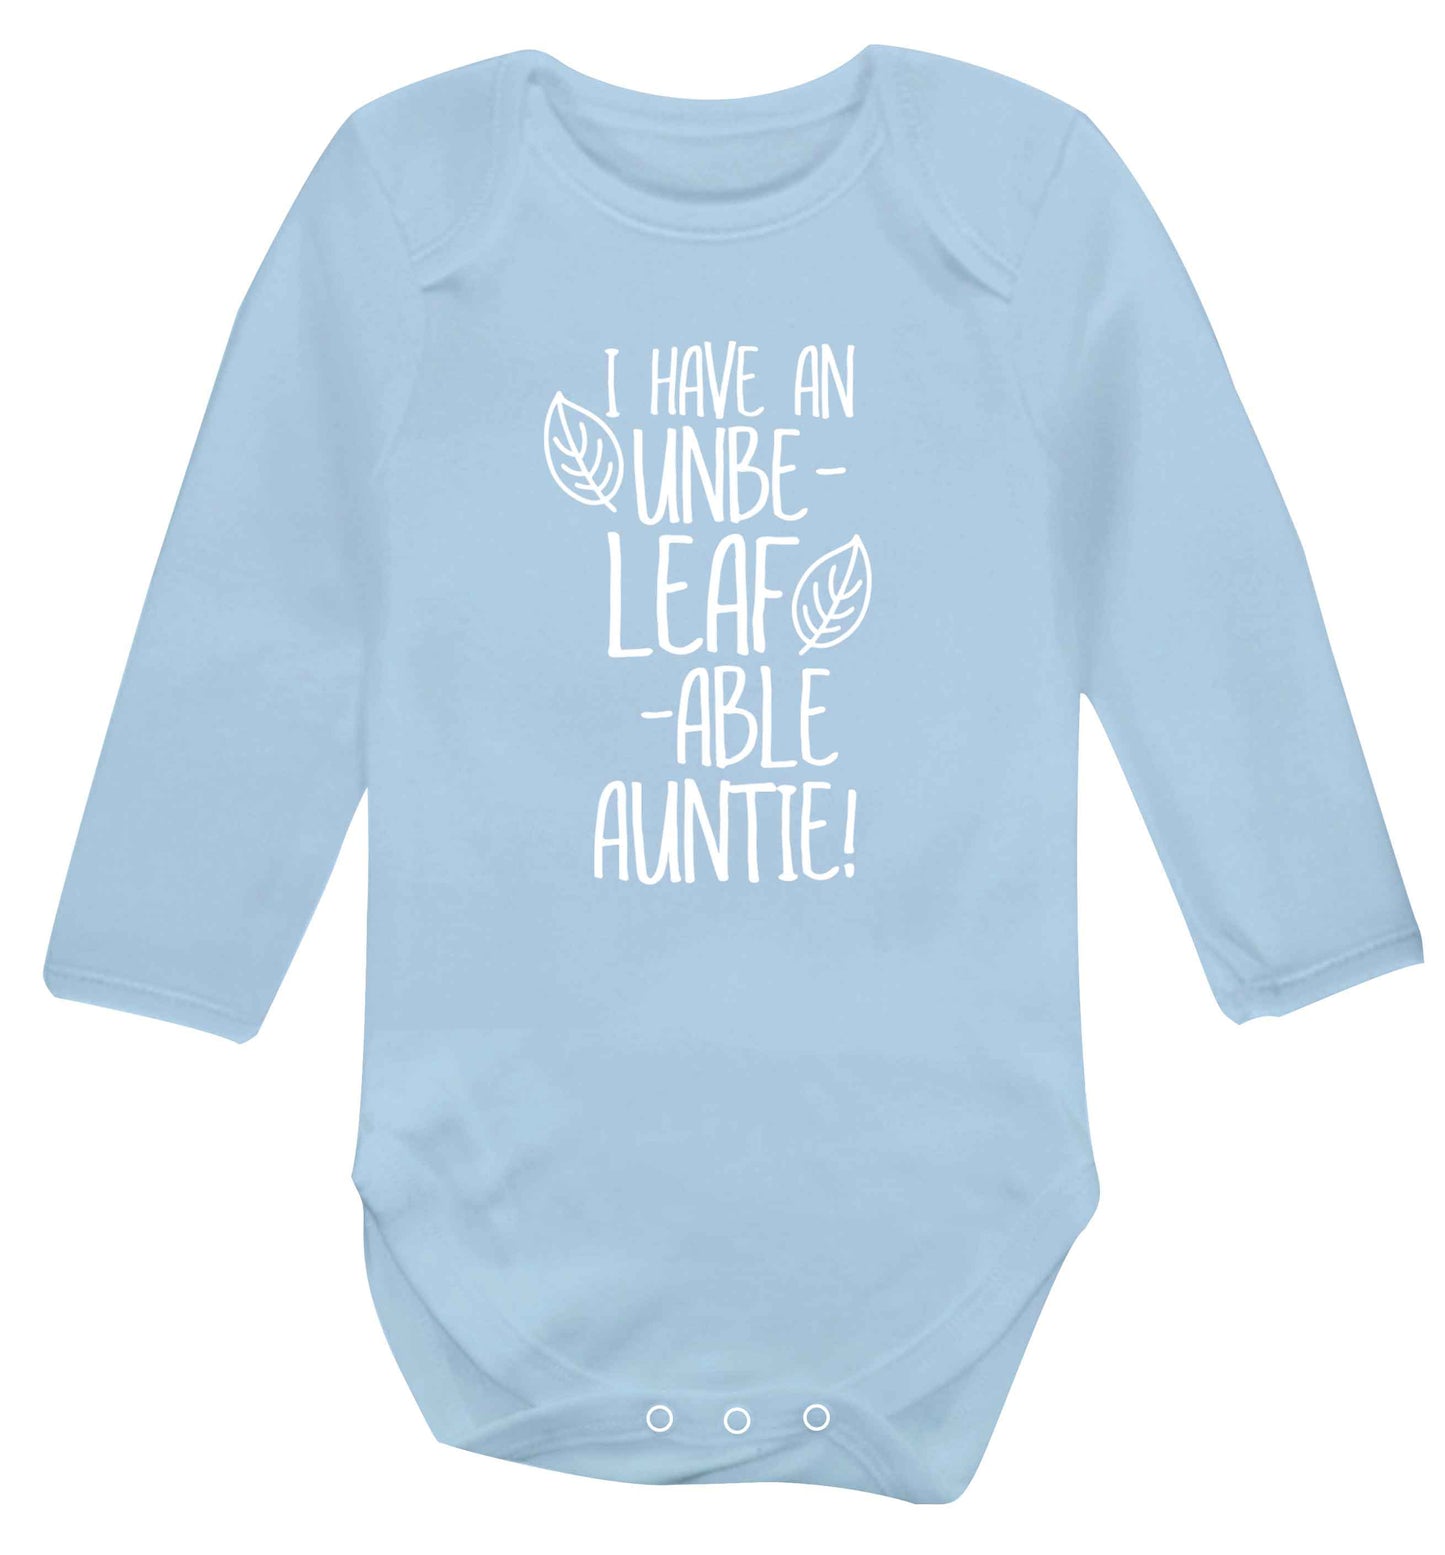 I have an unbe-leaf-able auntie Baby Vest long sleeved pale blue 6-12 months